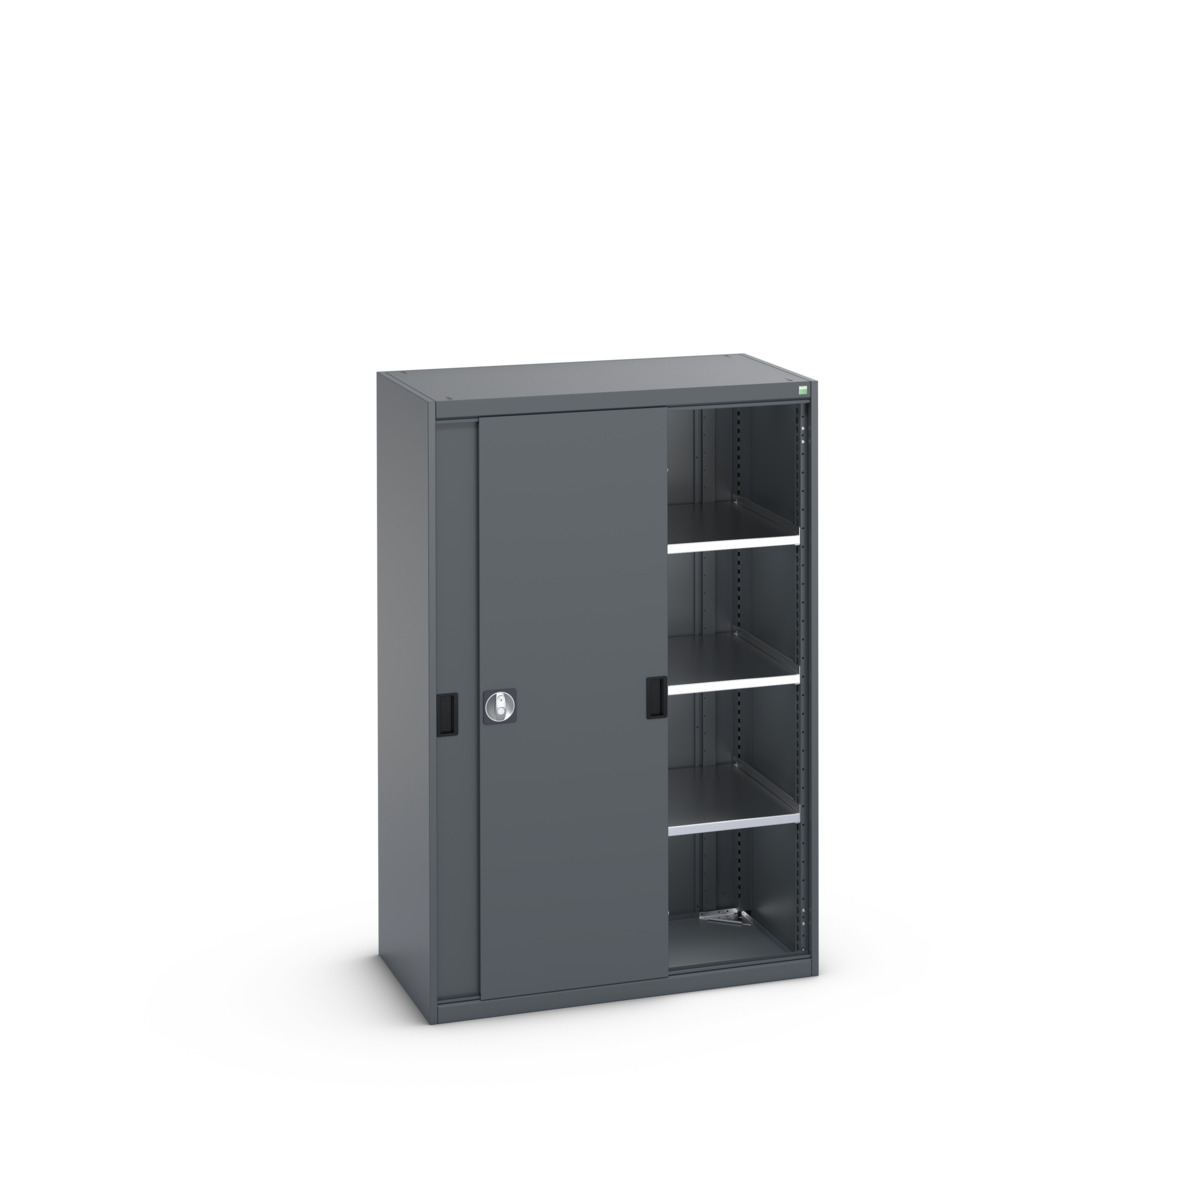 40021214.77V - Armoire Cubio SMS-10616-1